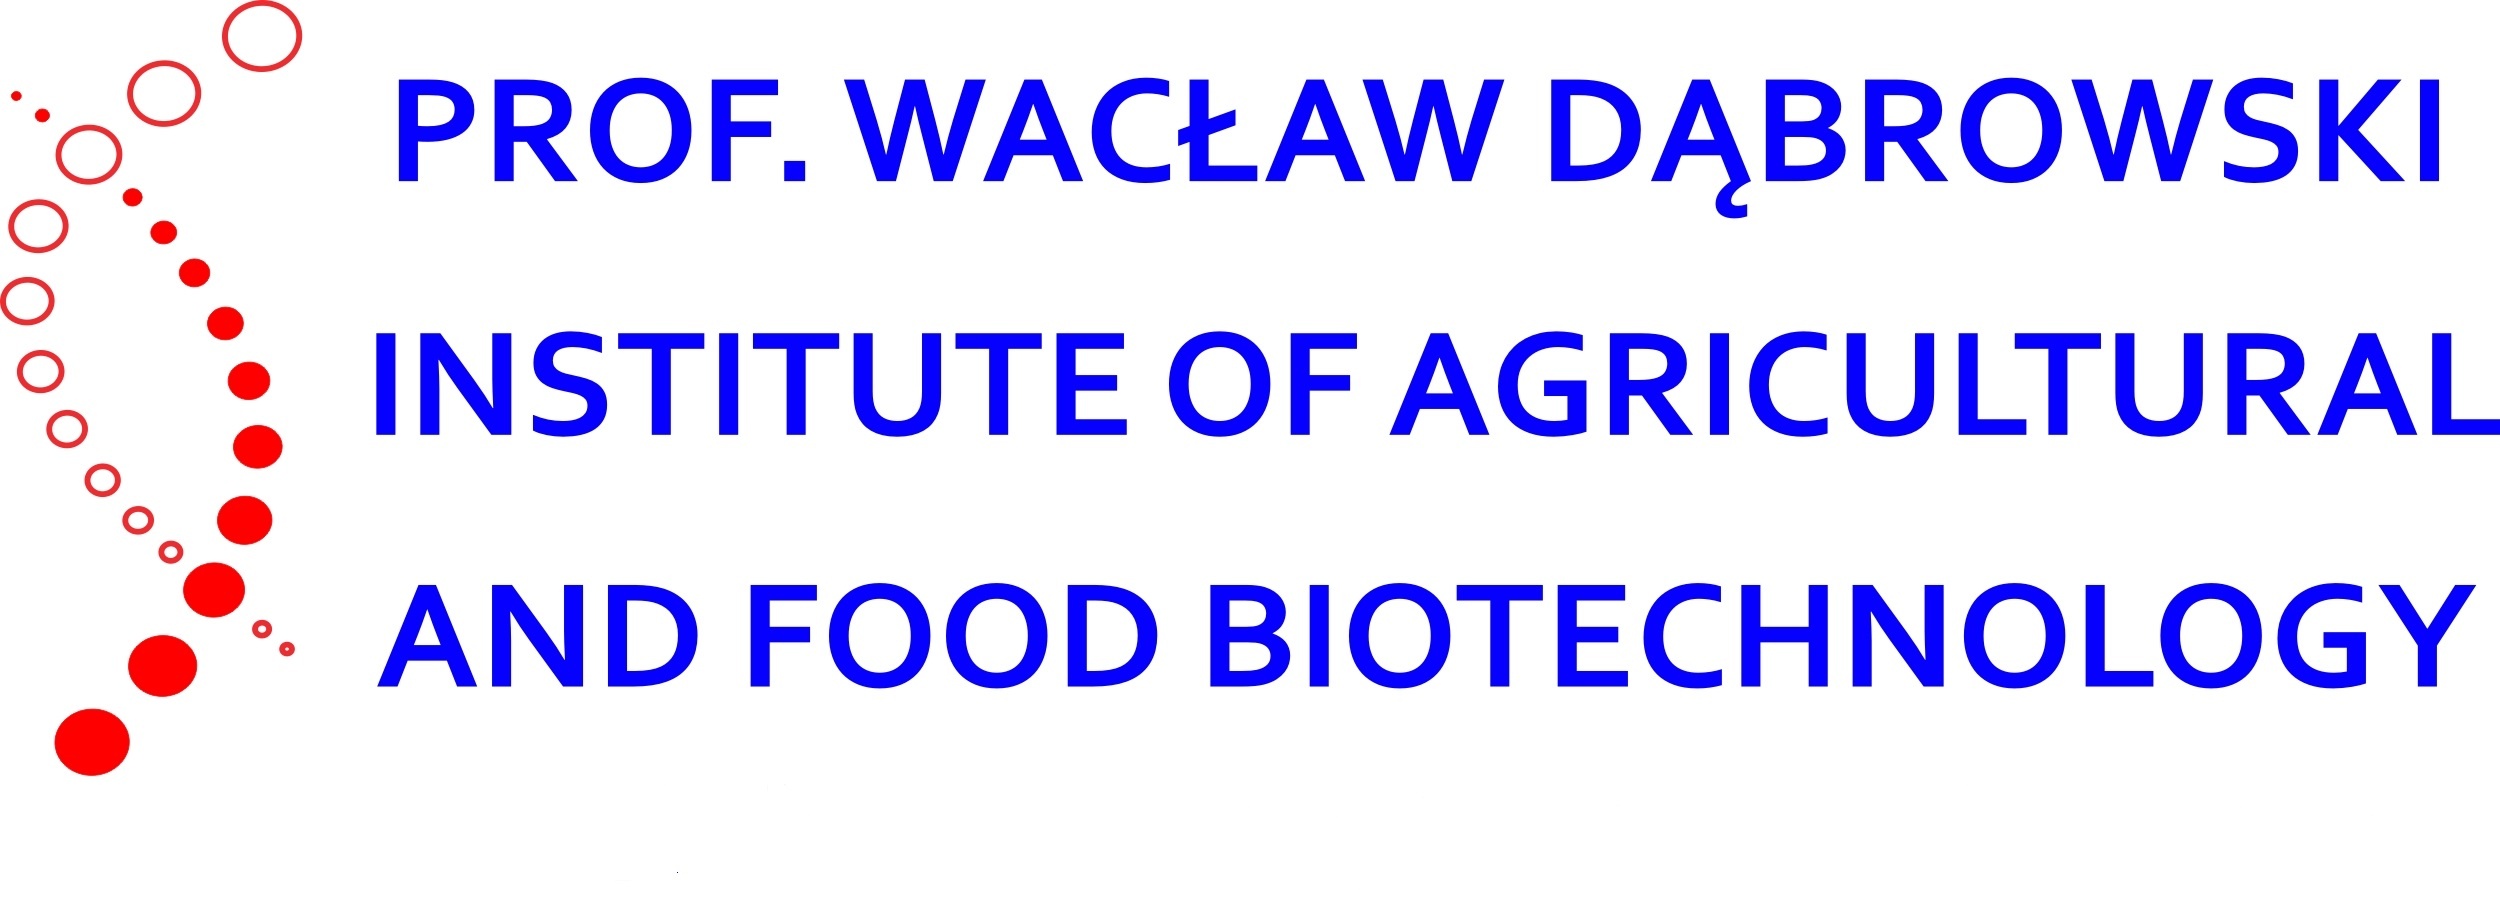 Institute of Agricultural and Food Biotechnology